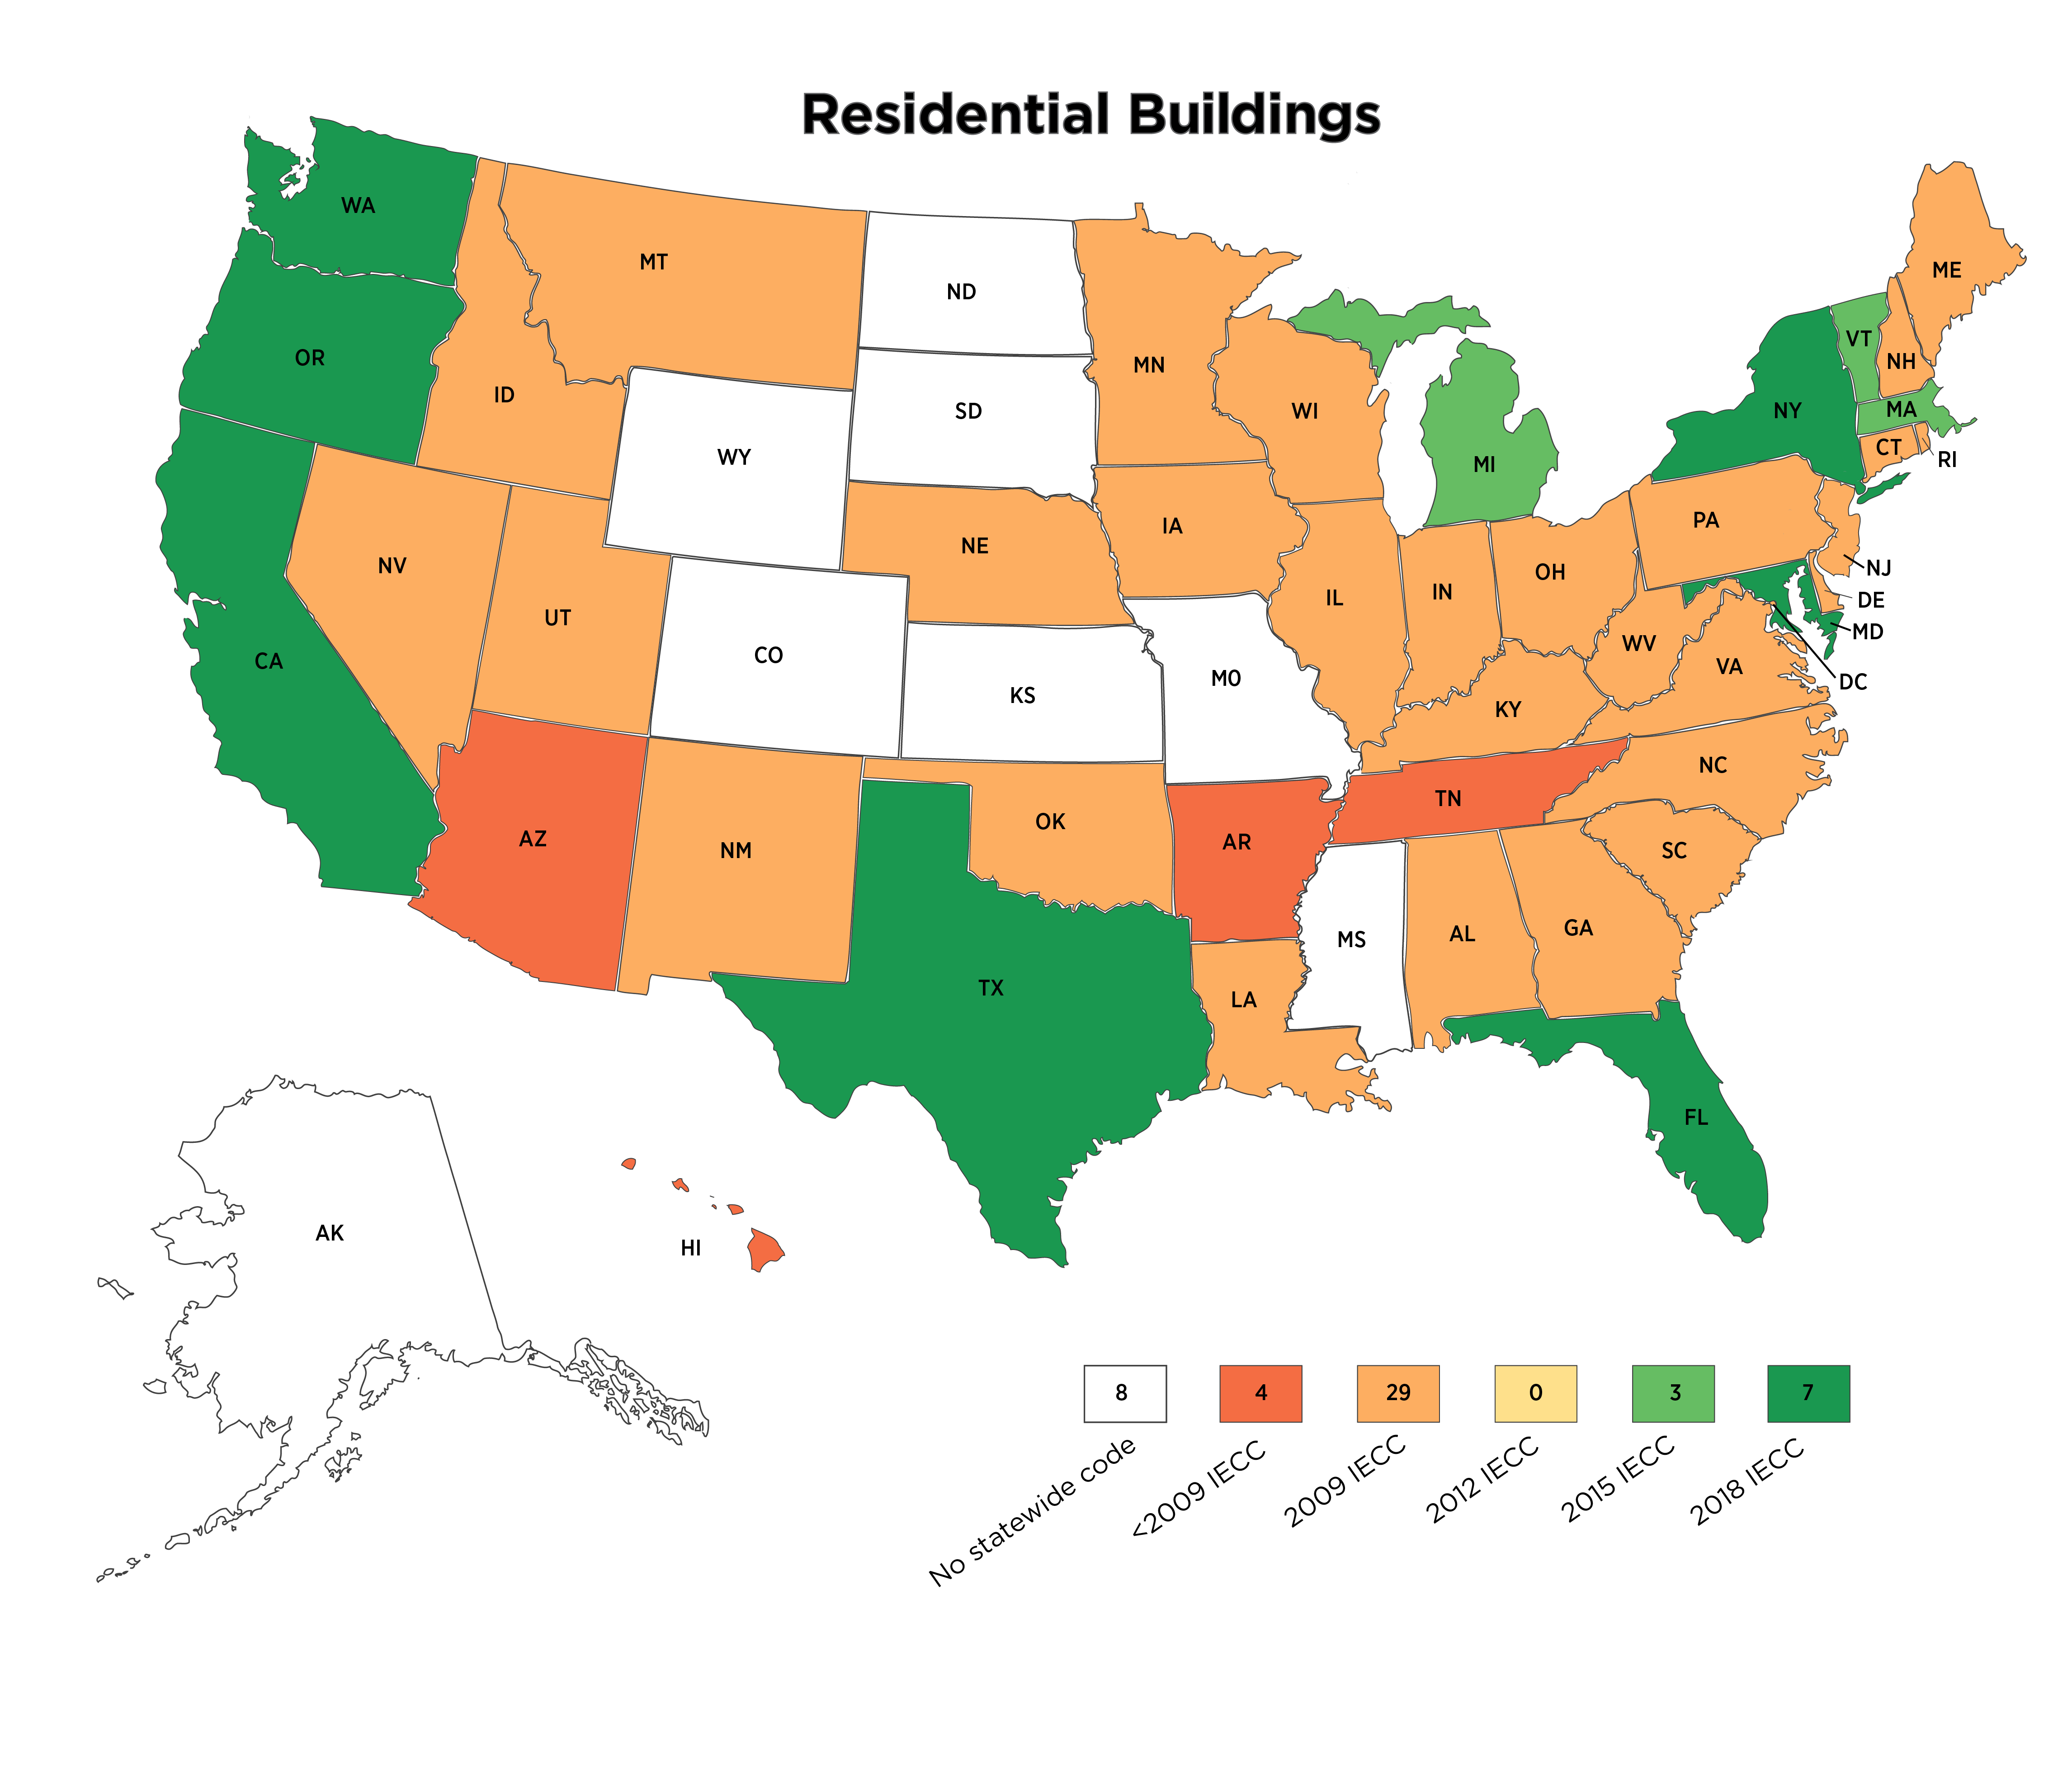 Energy Code Varies by State; How Progressive is Your Region?